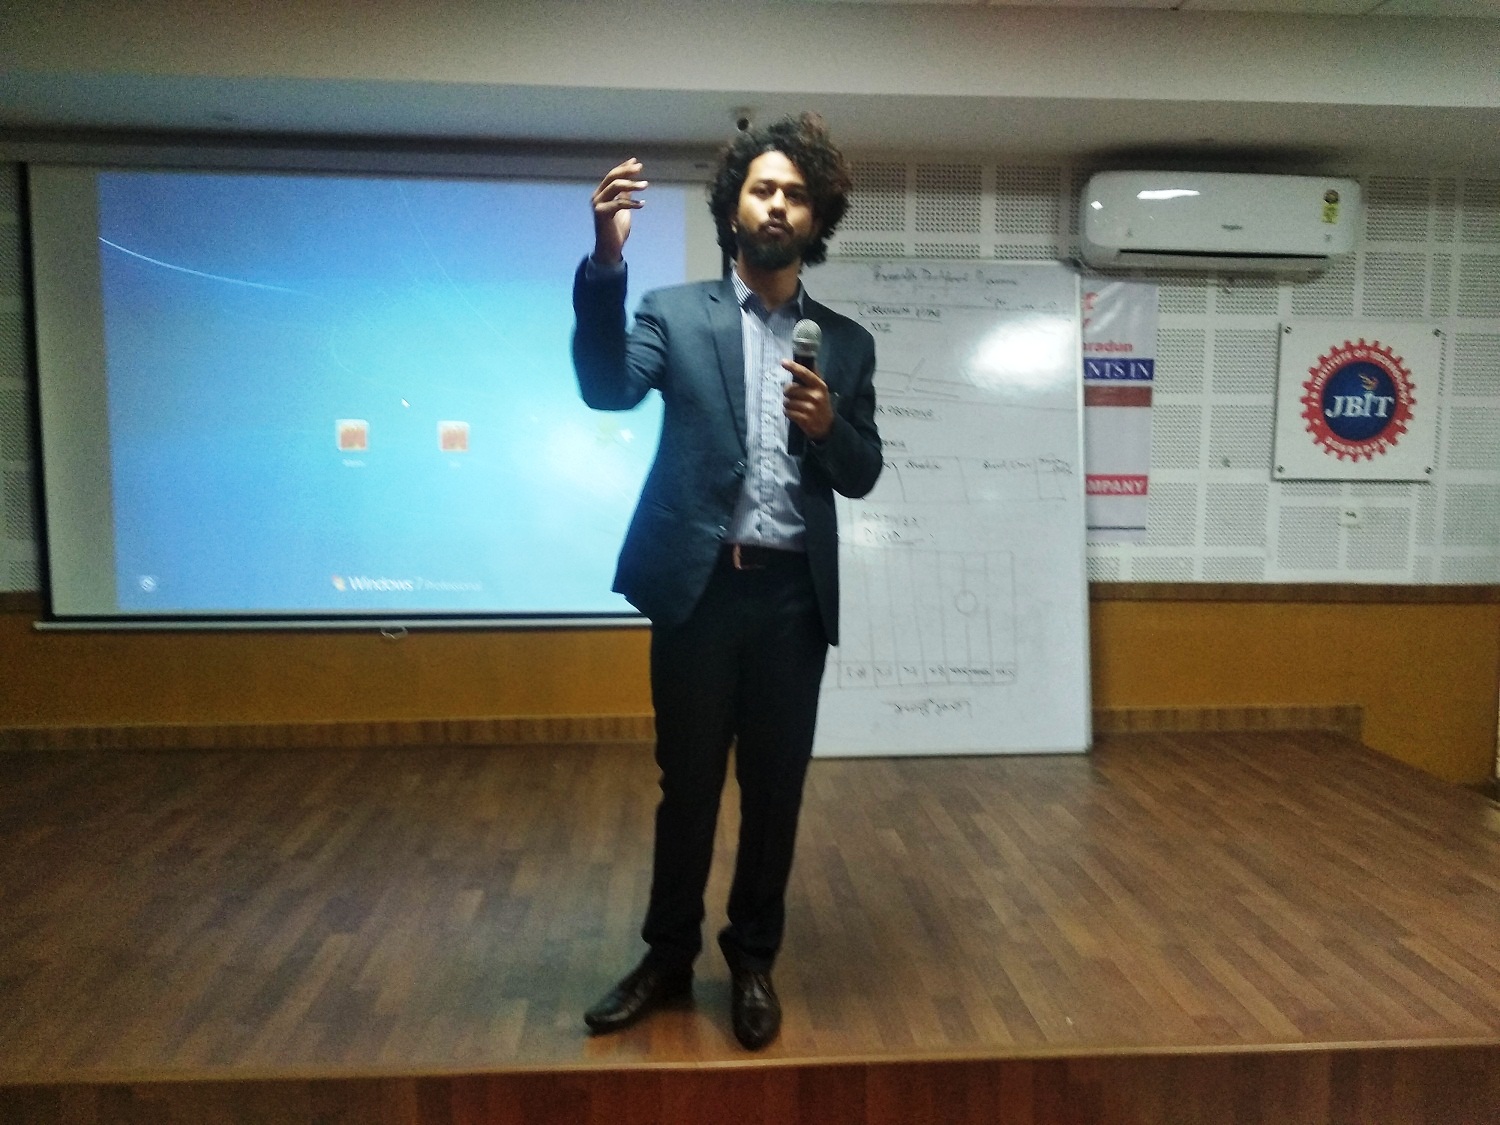 Workshop on “Personality Assessment”